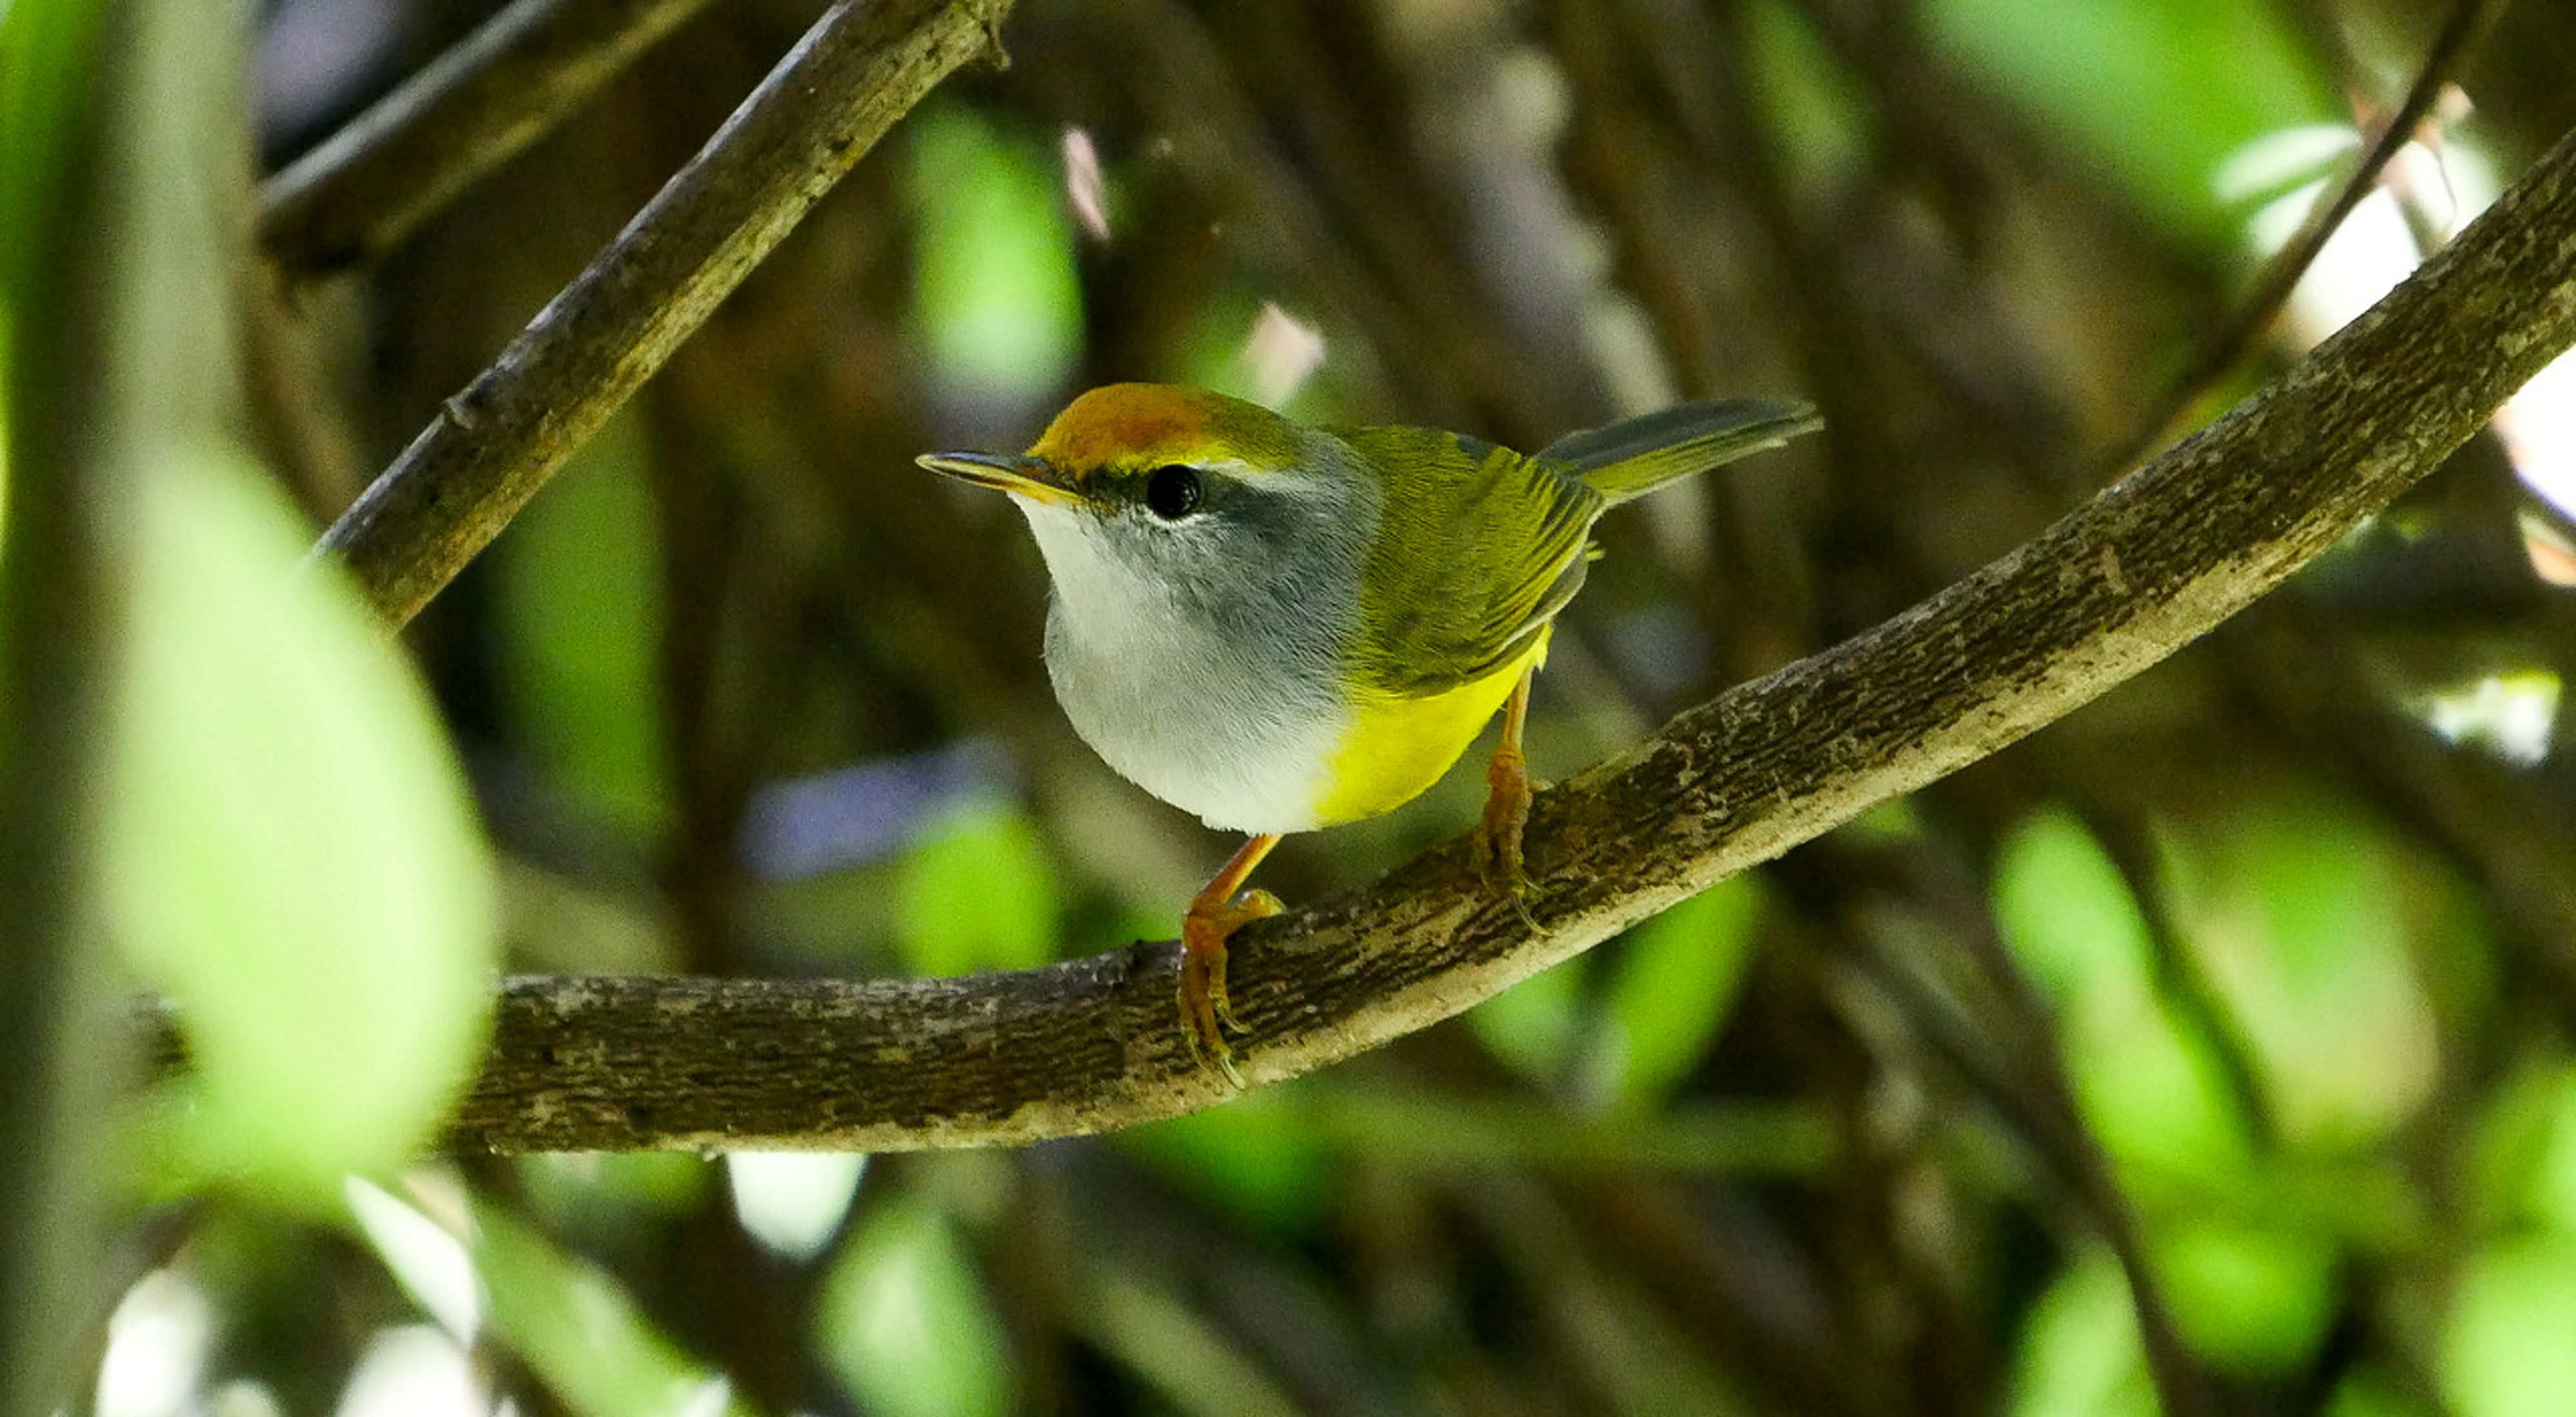 Secretive, yellow-colored warbler